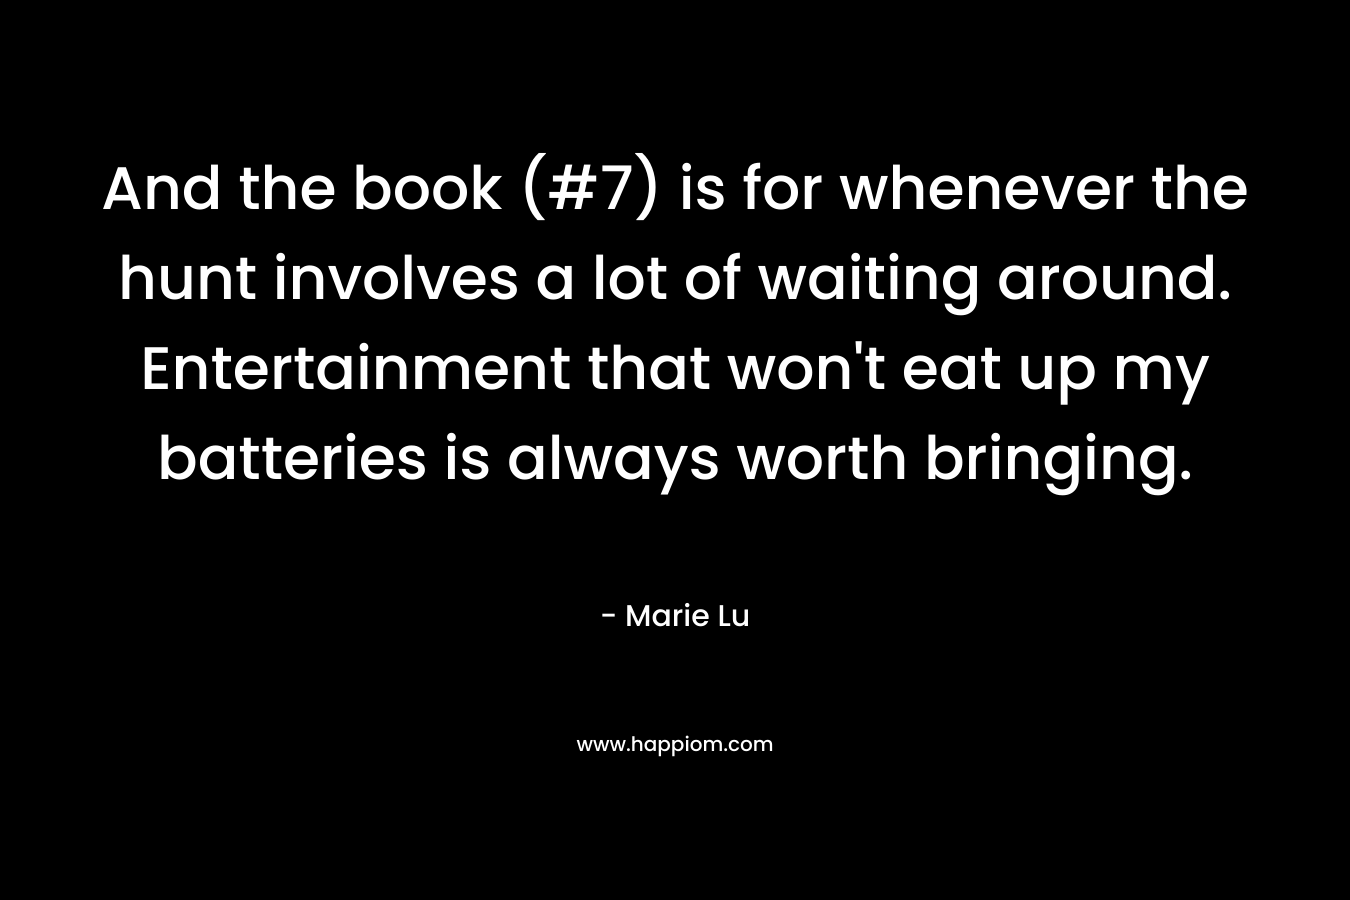 And the book (#7) is for whenever the hunt involves a lot of waiting around. Entertainment that won’t eat up my batteries is always worth bringing. – Marie Lu